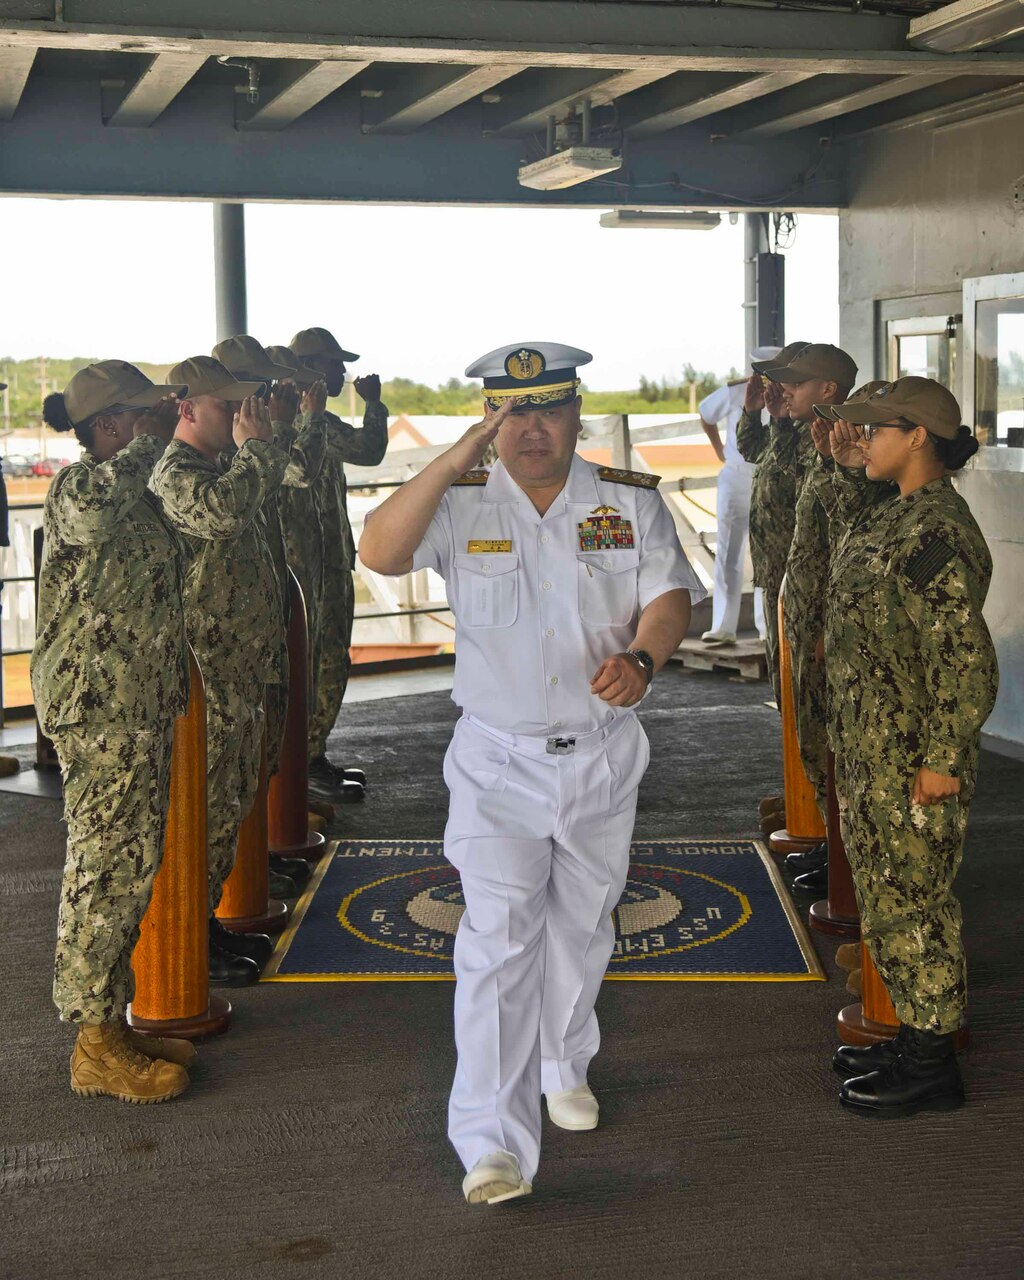 Vice Adm. Tatsuhiko Takashima, Commander, Fleet Submarine Forces for Japanese Maritime Self-Defense Force,
arrives at the quarterdeck of the submarine tender USS Emory S. Land (AS 39) for a scheduled tour. During his visit to Guam, Takashima viewed ships, facilities and sites on island including ship repair, quality-of-life facilities for submariners and partnership opportunities in the region.